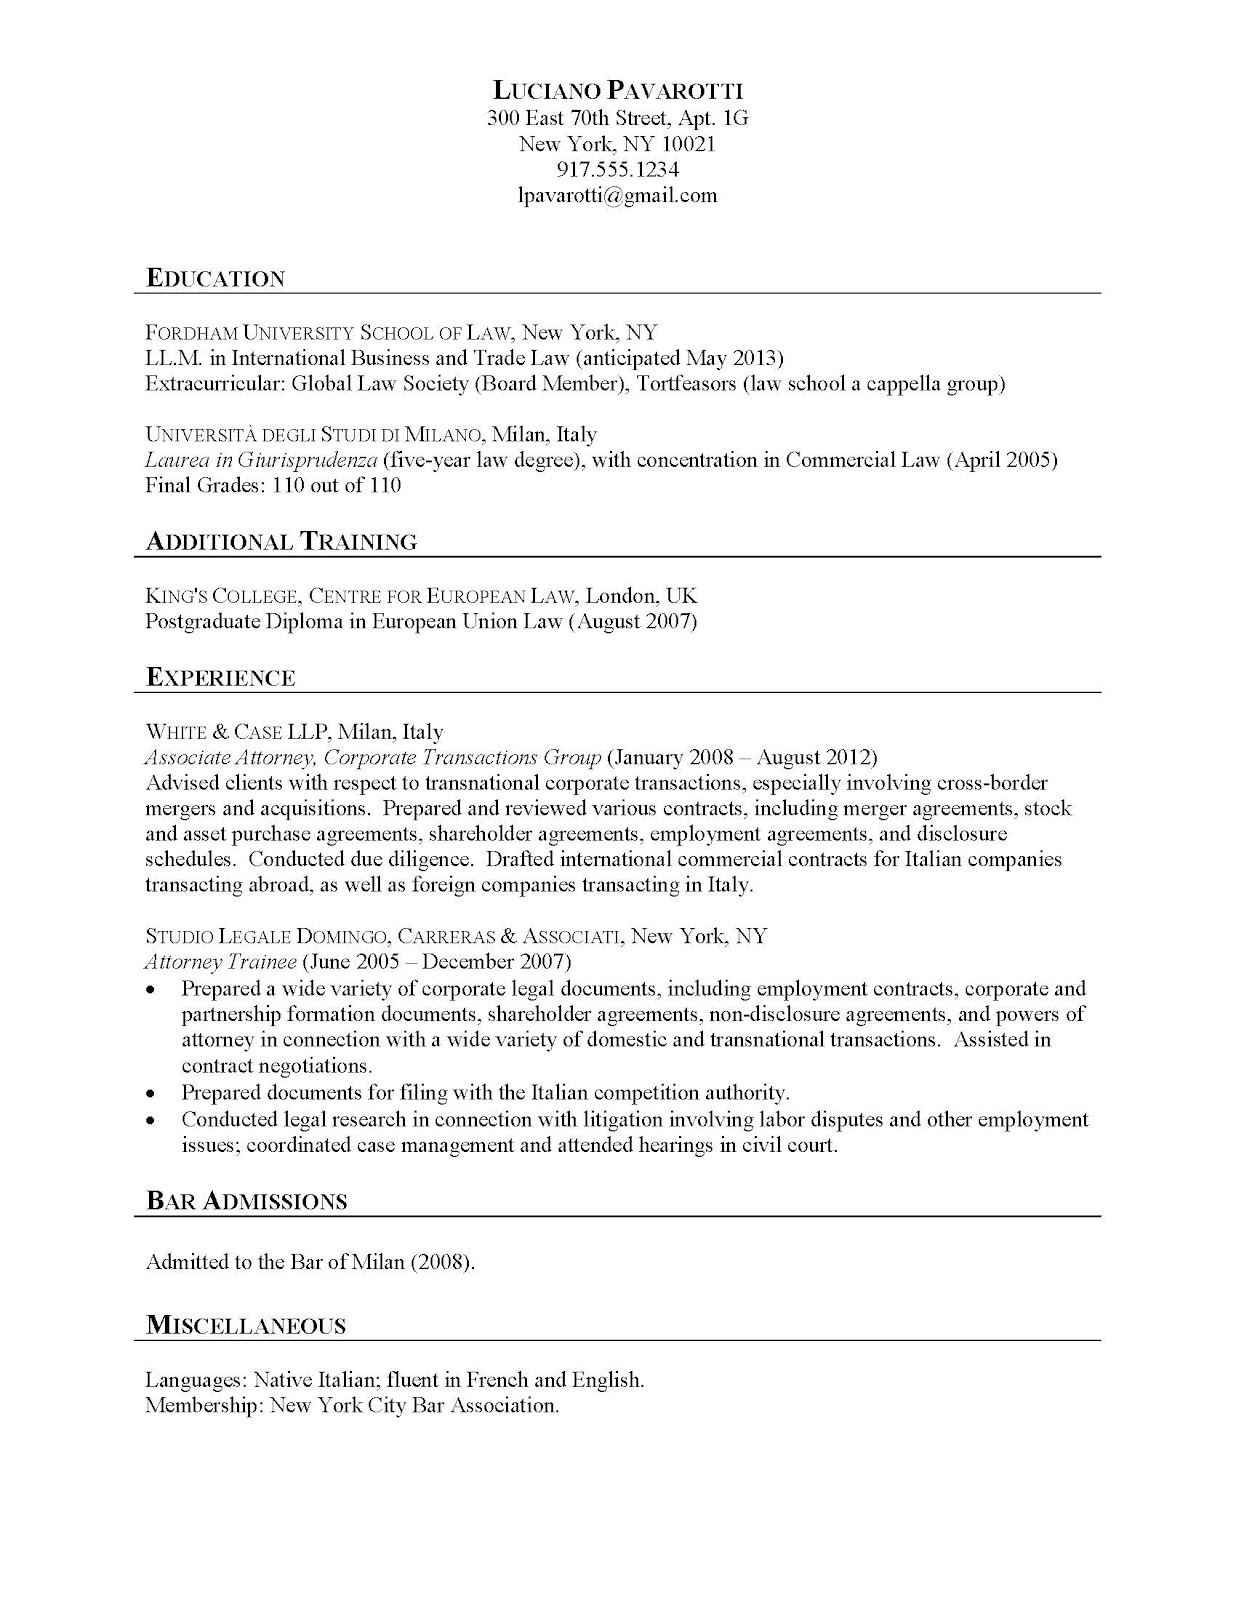 Harvard law cover letter